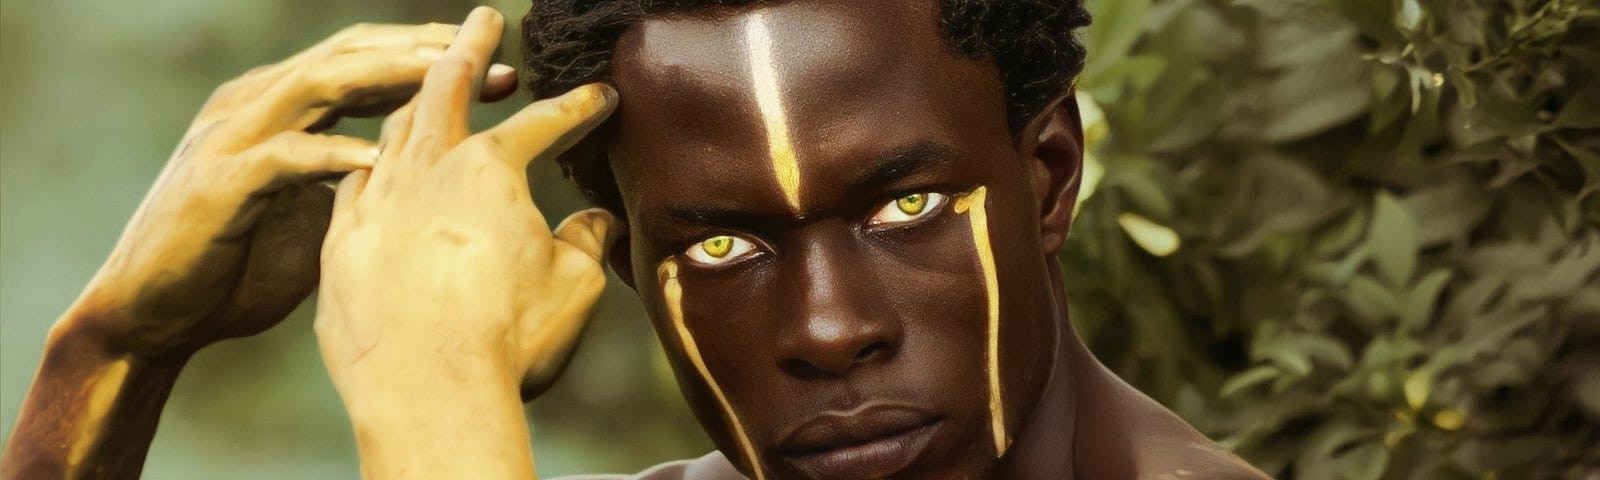 A man of African descent stares into the came lens wearing neon yellow contact lenses, four vertical yellow stripes of paint on his face, and his forearms are covered in yellow paint. He’s posing amidst bushes and greenery in the background.